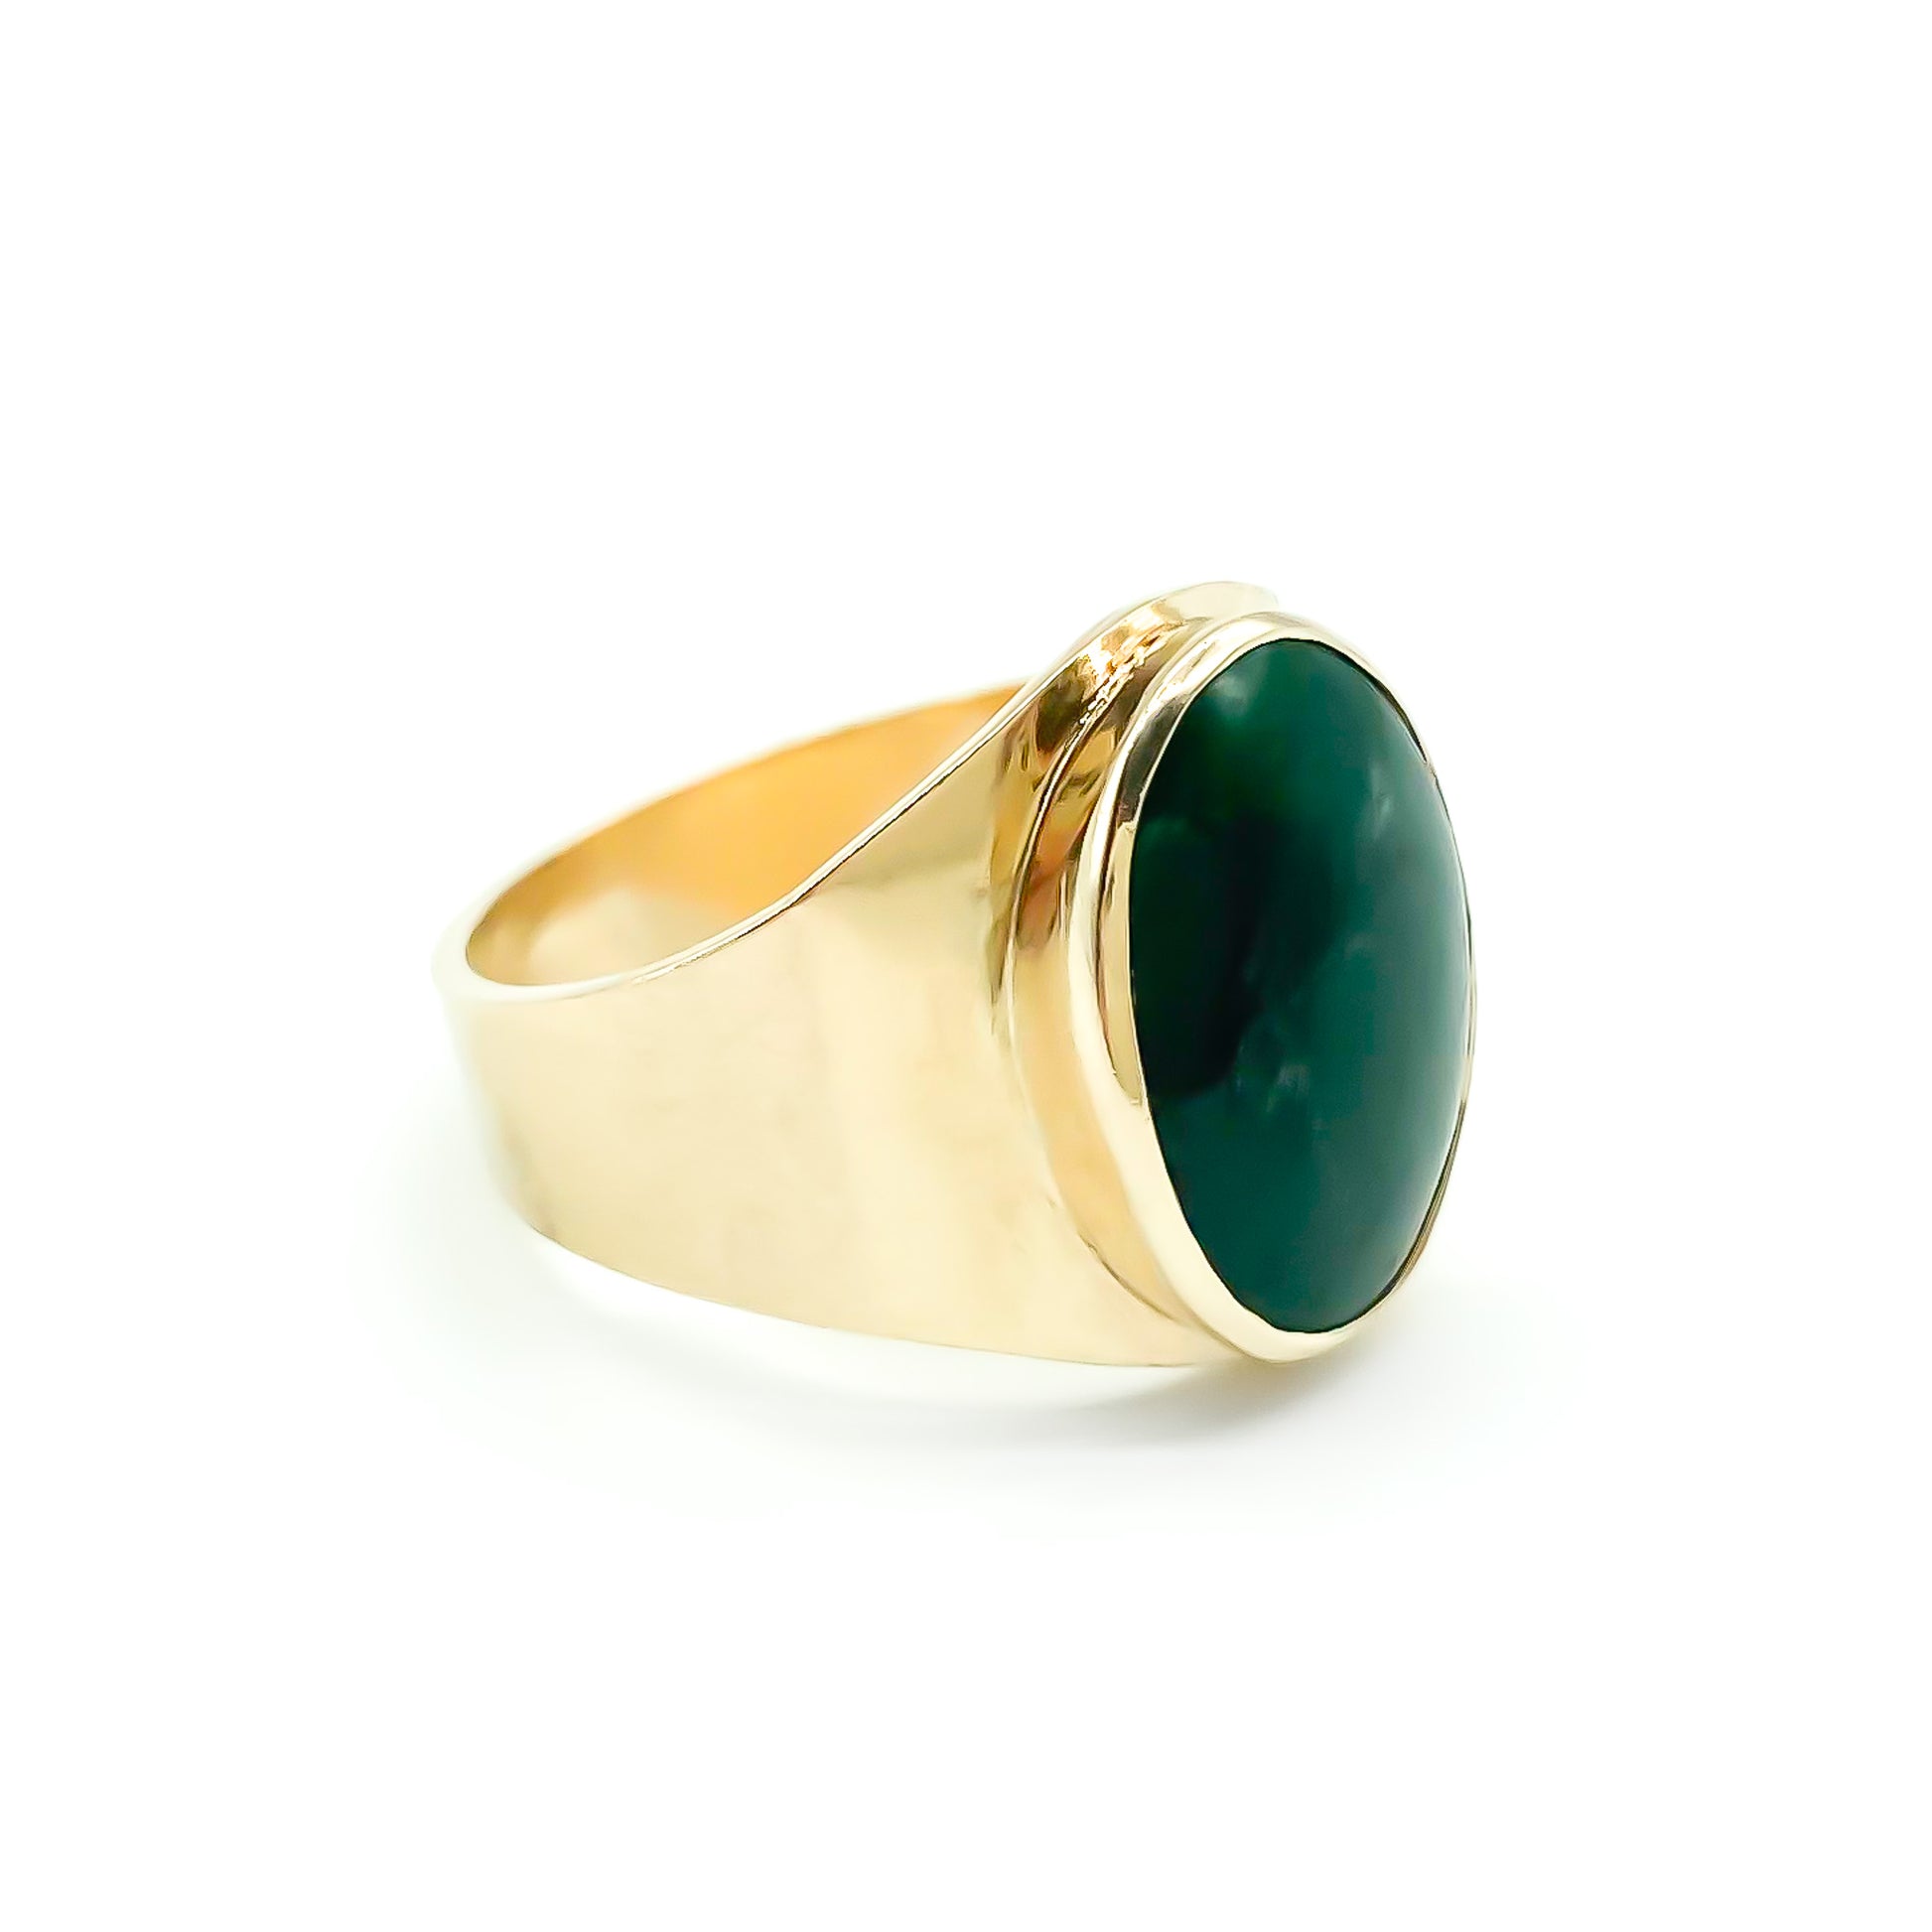 Lovely 9ct gold ring set with a beautiful dark green cabochon jade stone.